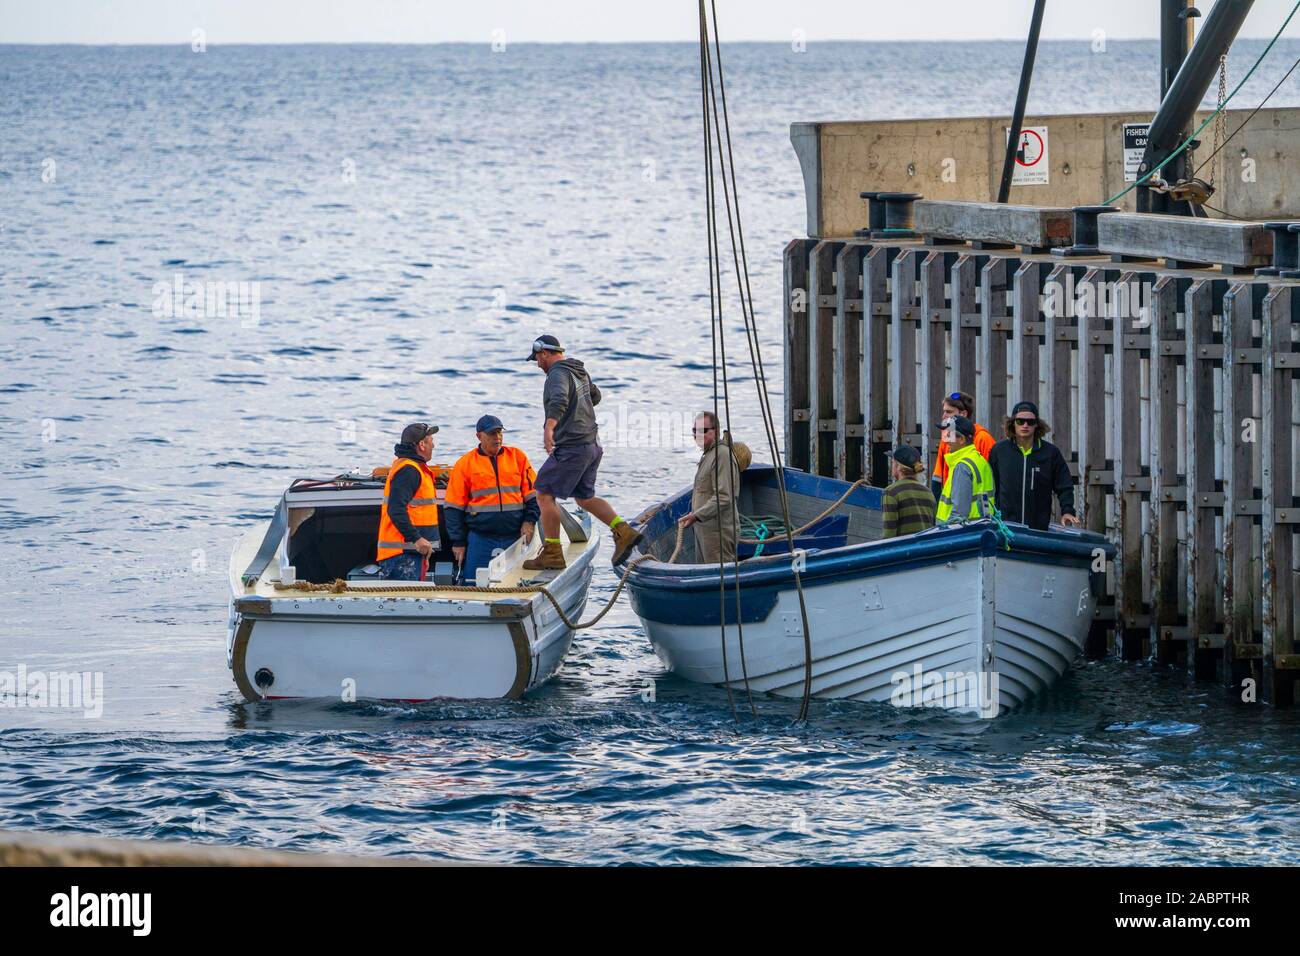 Workers in a lighter in Cascade Bay about to be towed out by the motor launch alongside to the supply ship. Norfolk Island, Australia Stock Photo